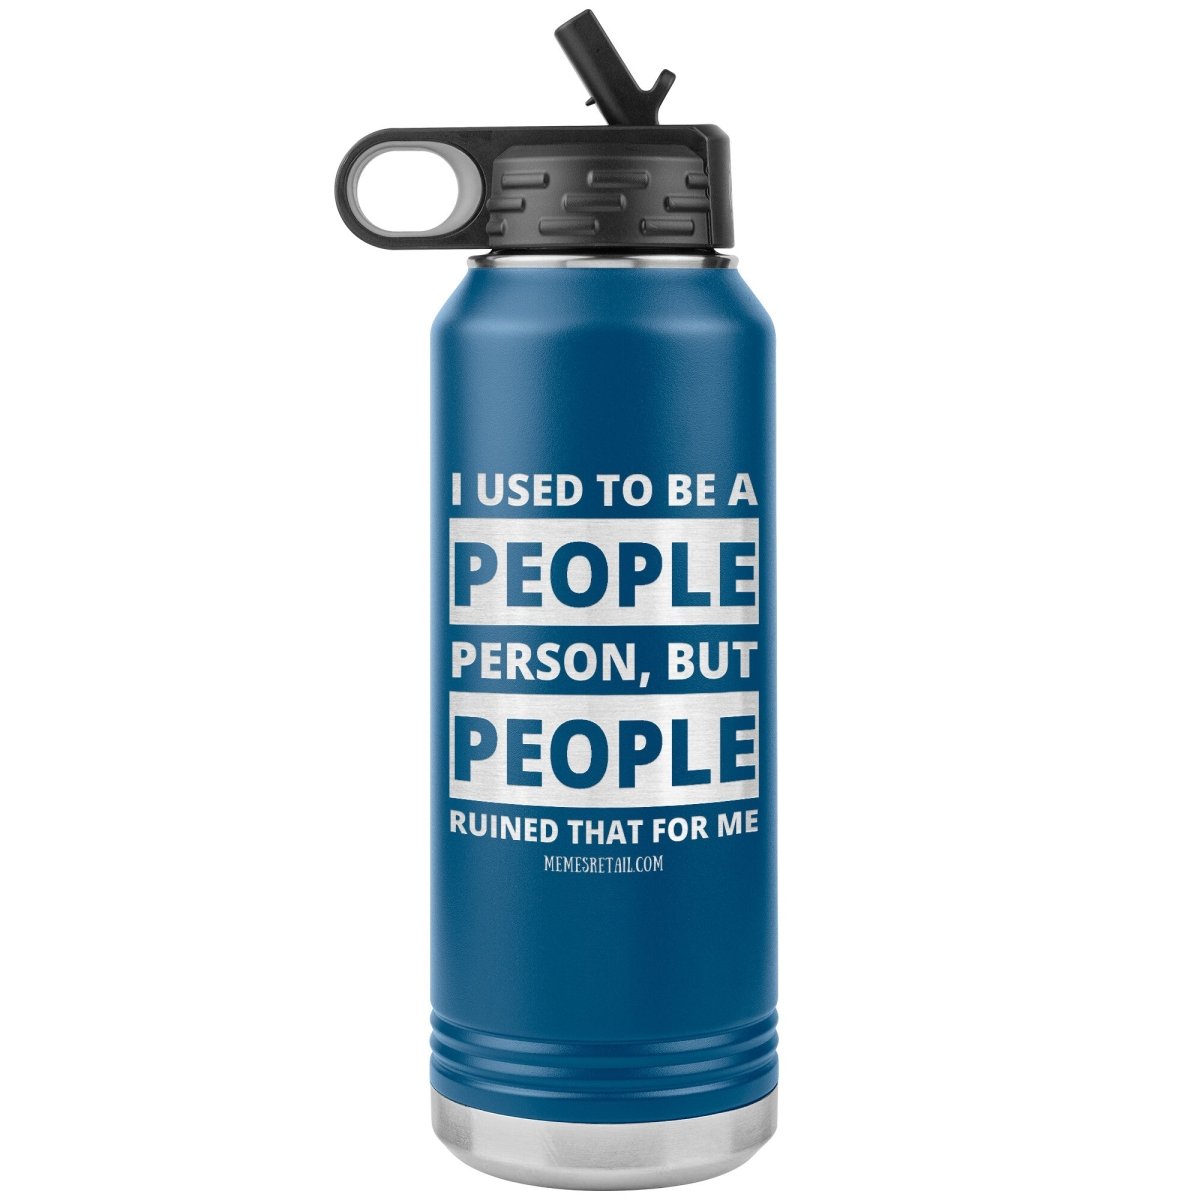 I Used To Be A People Person, But People Ruined That For Me 32 oz Water Tumbler, Blue - MemesRetail.com